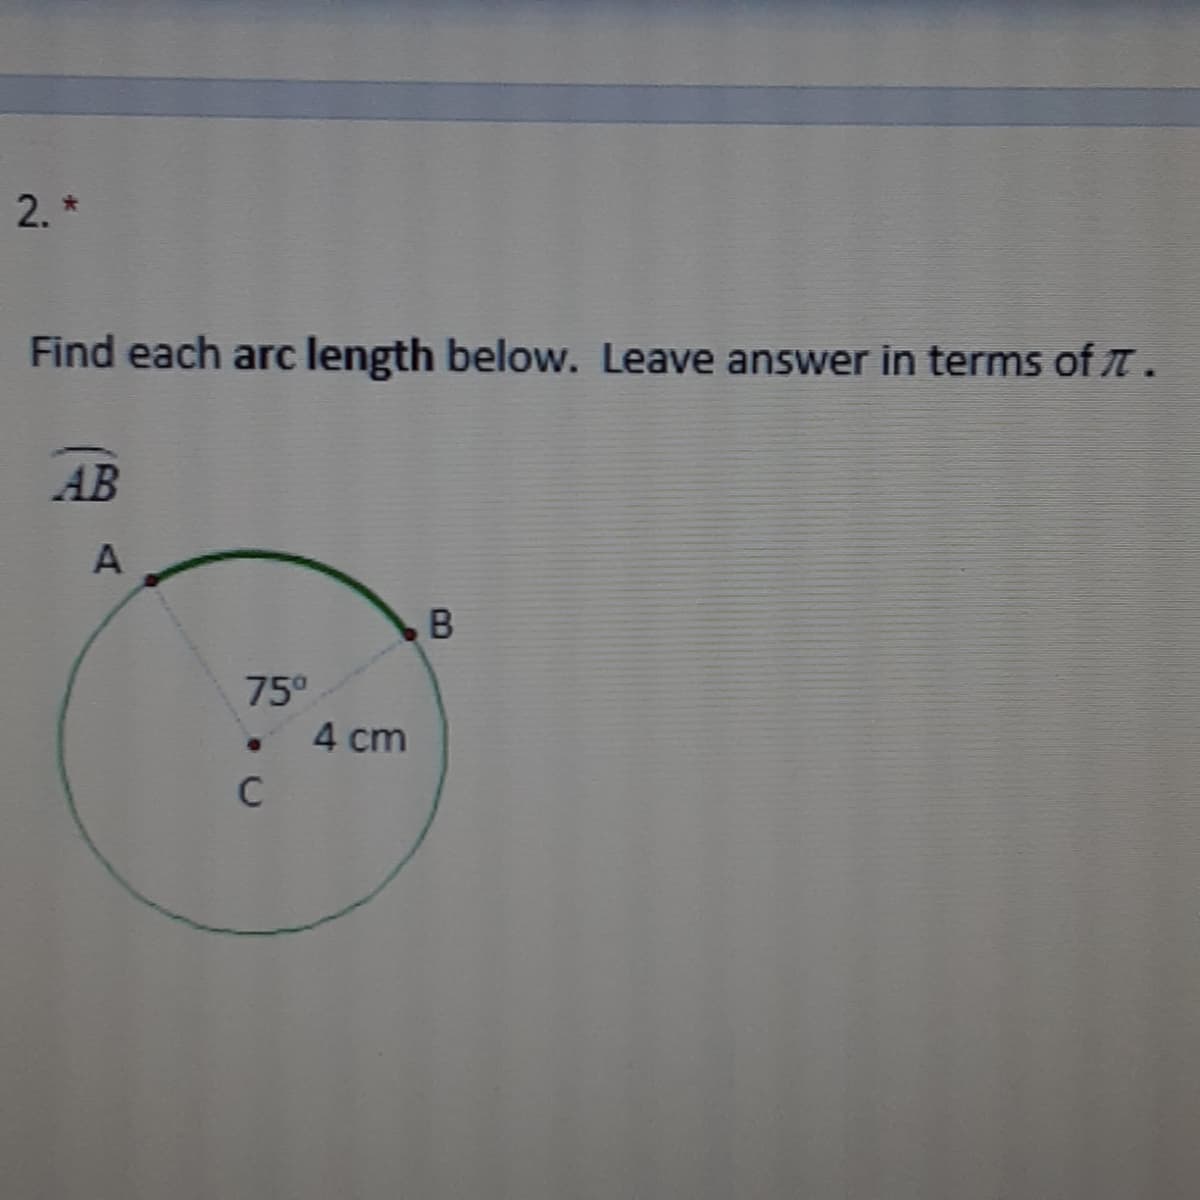 2. *
Find each arc length below. Leave answer in terms of T .
AB
A
В
75°
4 cm
C
